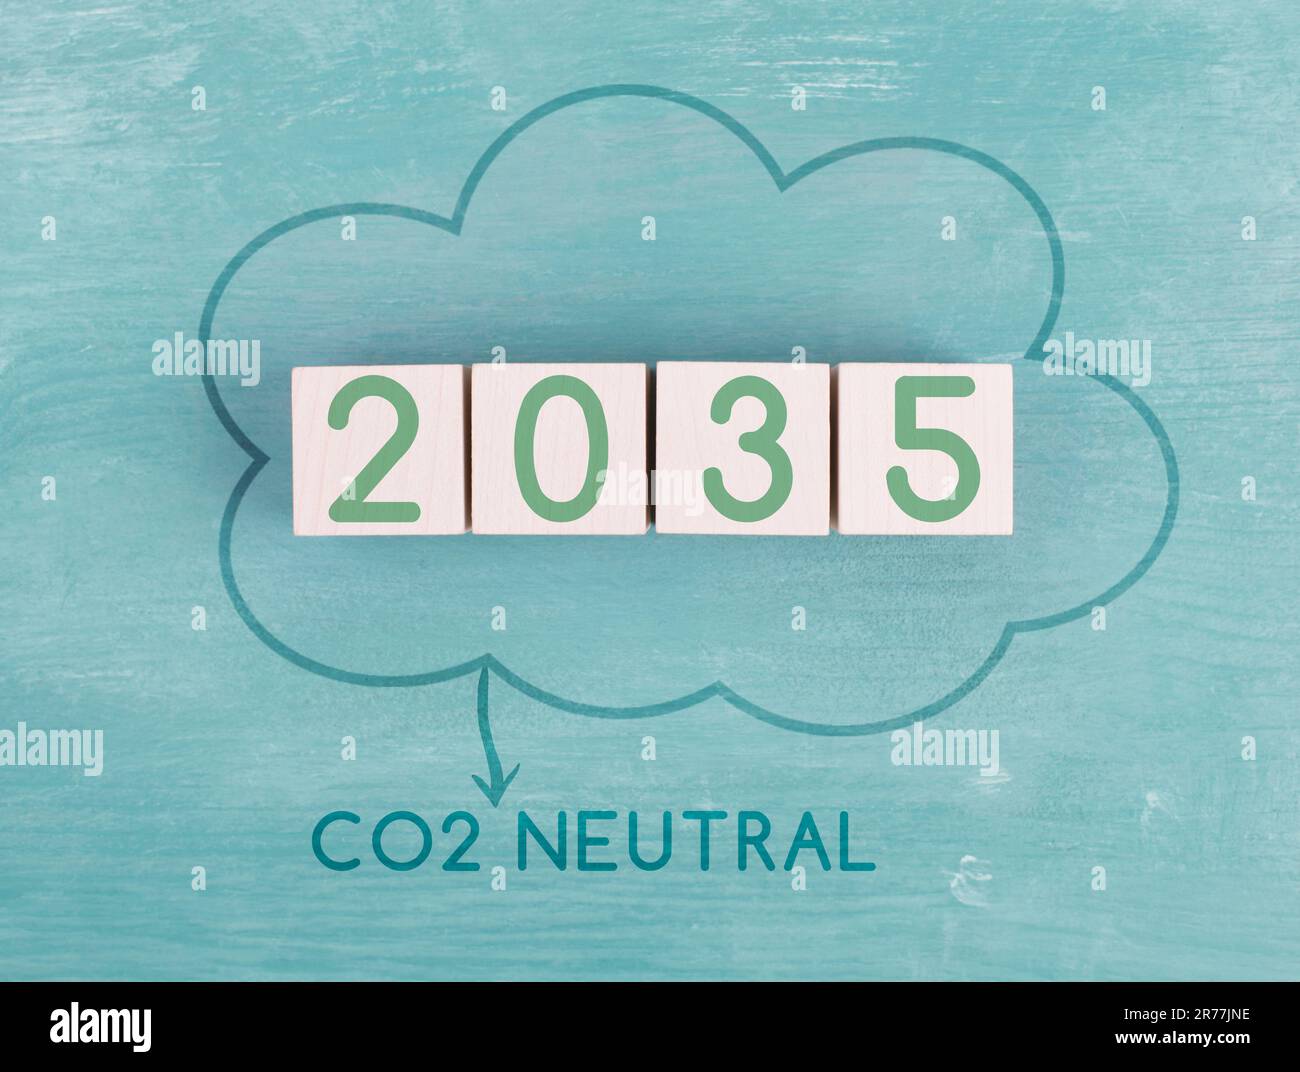 CO2 neutral until 2035, green energy, reduce carbon emission footprint, sustainable renewable electricity , environment protection, eco lifestyle Stock Photo